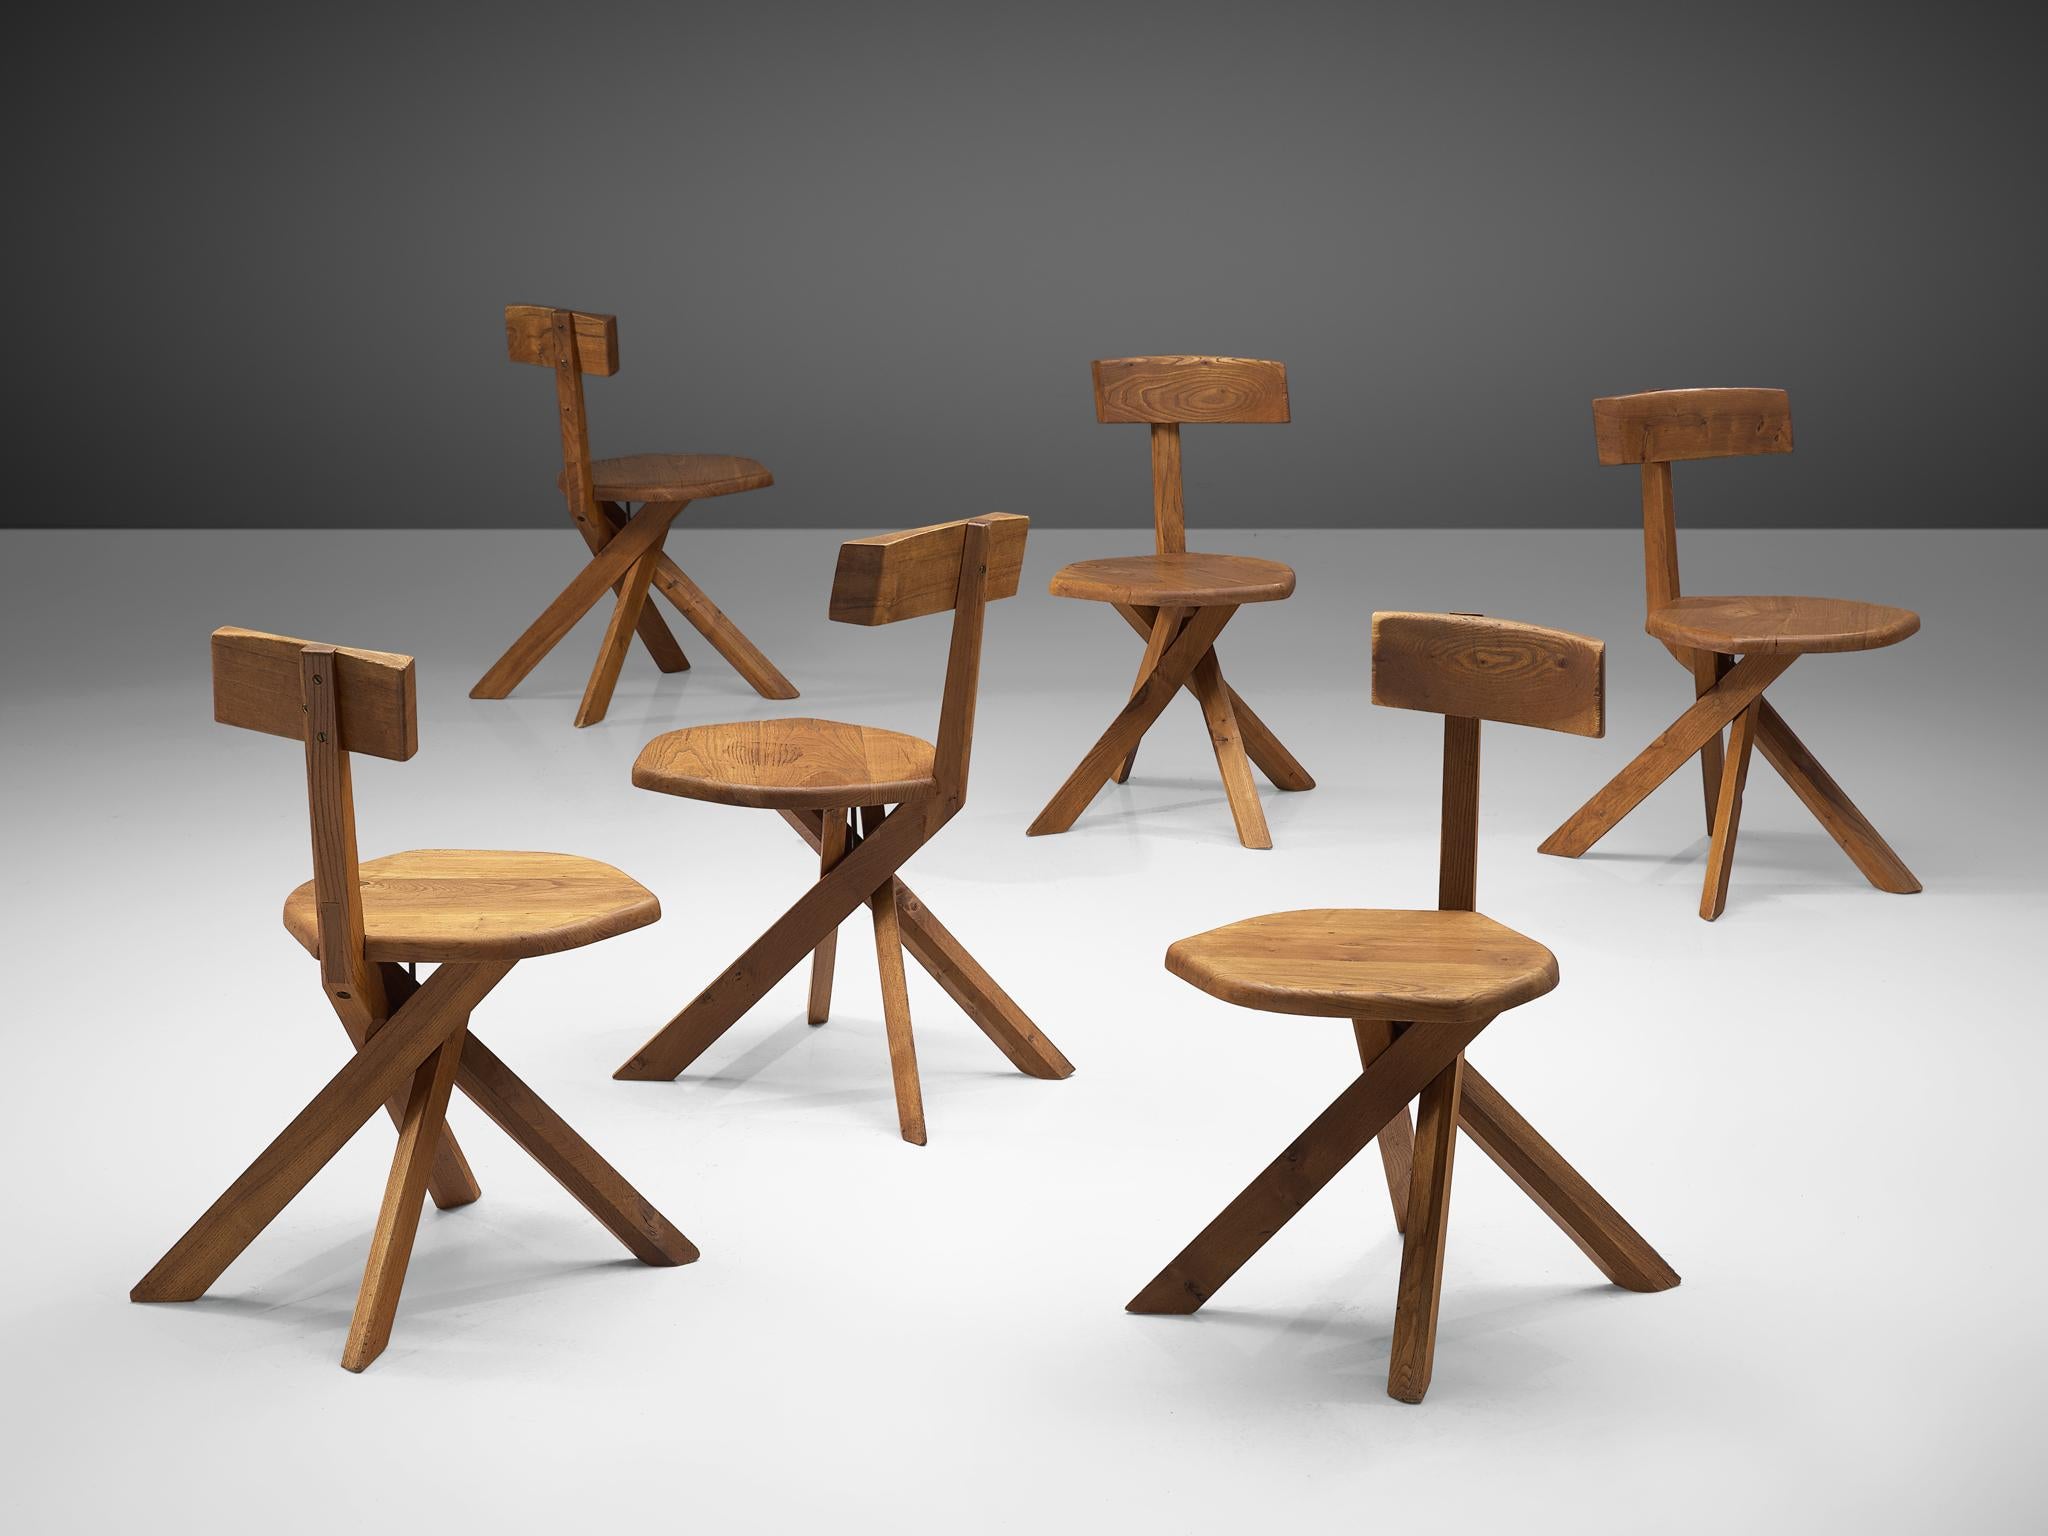 Pierre Chapo, set of six 'S34' dining chairs, elmwood, France, 1960s

These asymmetrical chairs with twisted base are true icons of Pierre Chapo's playful and solemn designs. The backrest is placed just slightly out of the middle, this